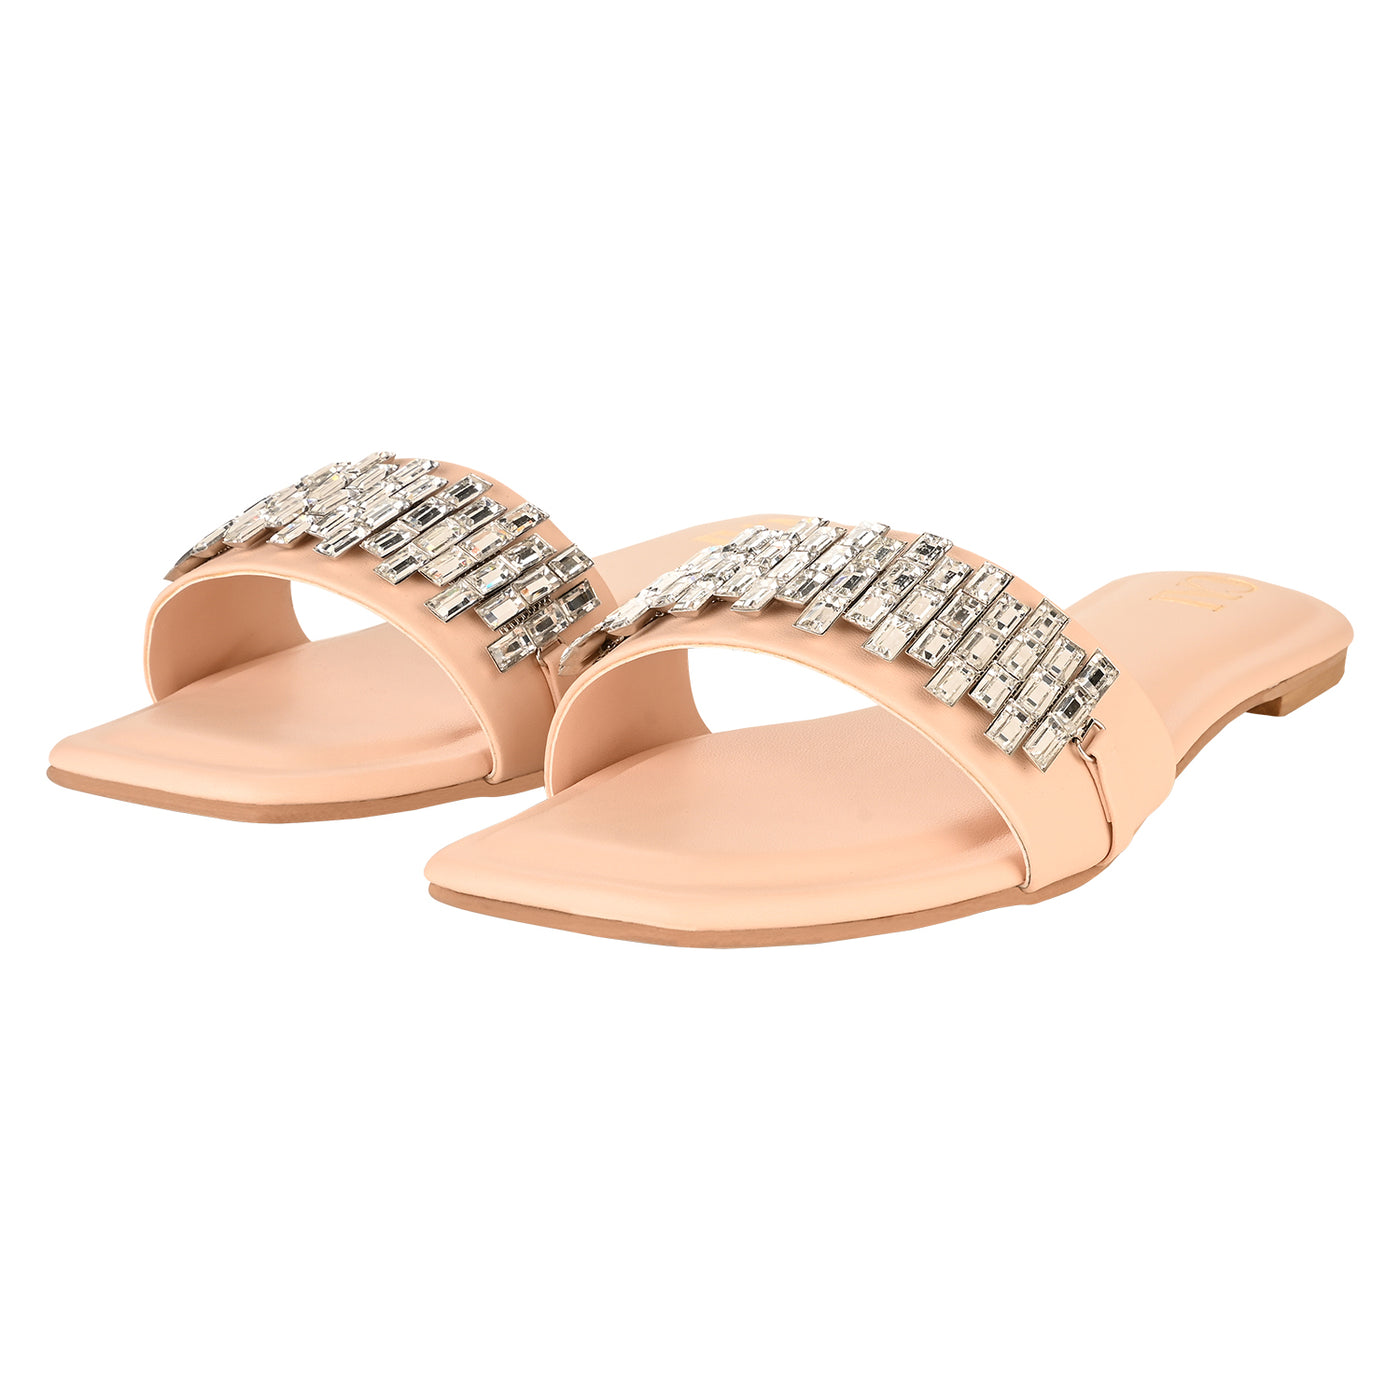 Buy Sparkle in Peach Flats In india